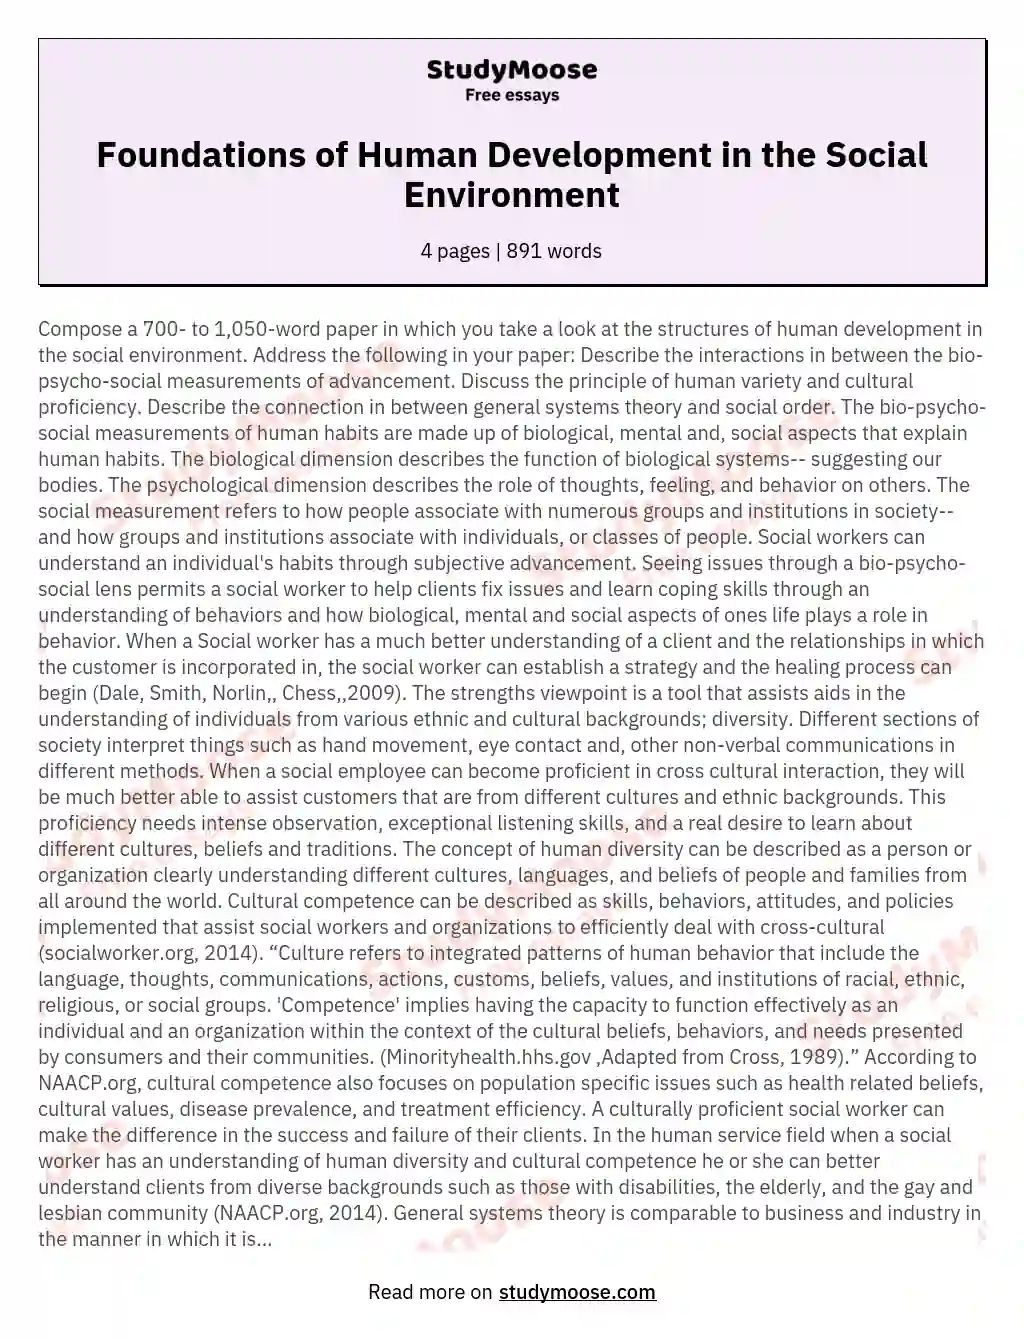 Foundations of Human Development in the Social Environment essay